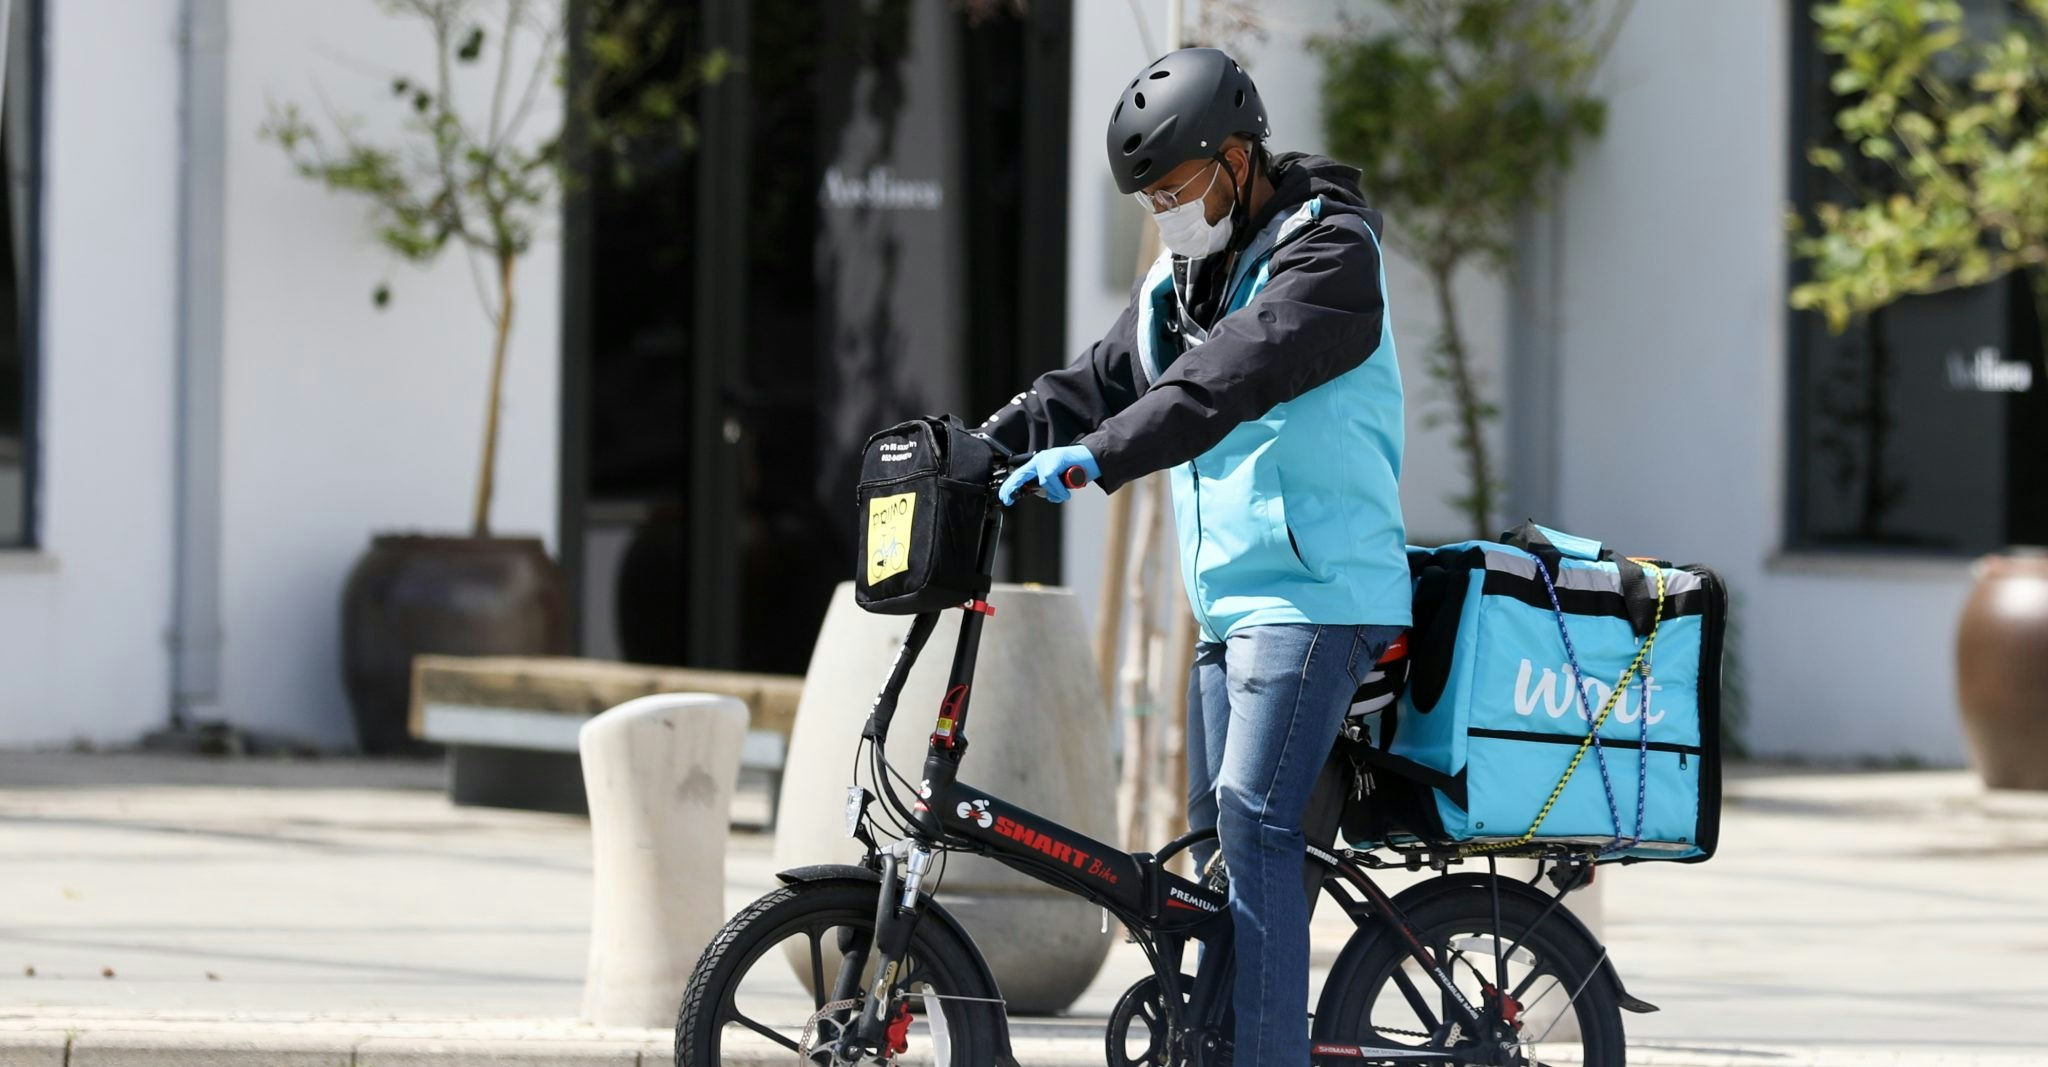 Wolt joins forces with DoorDash - Wolt Blog